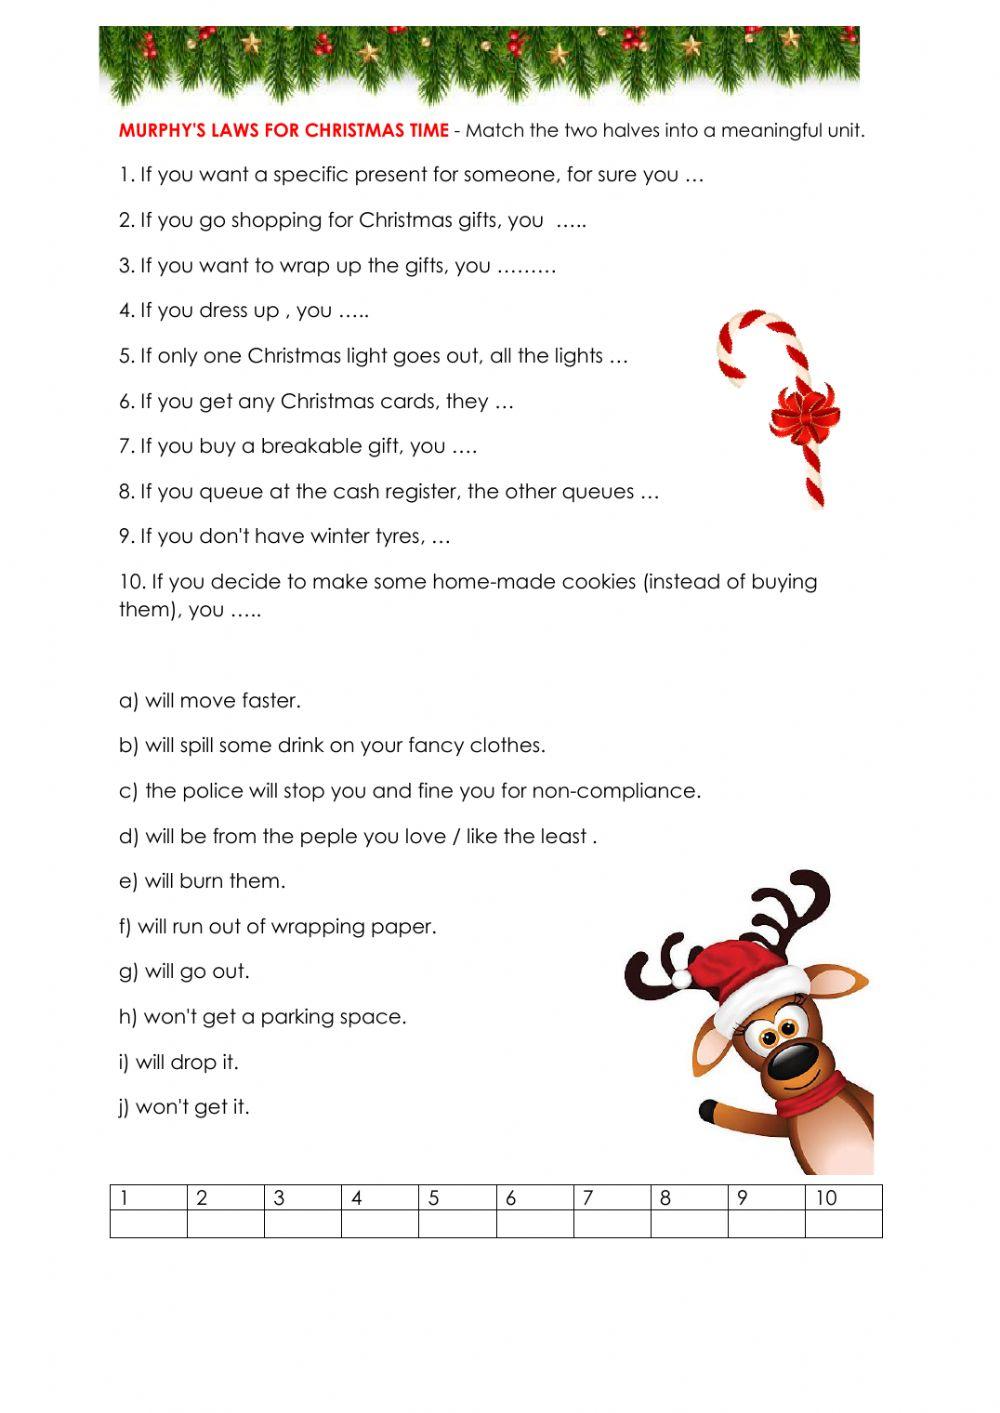 Murphy's laws for Christmas time